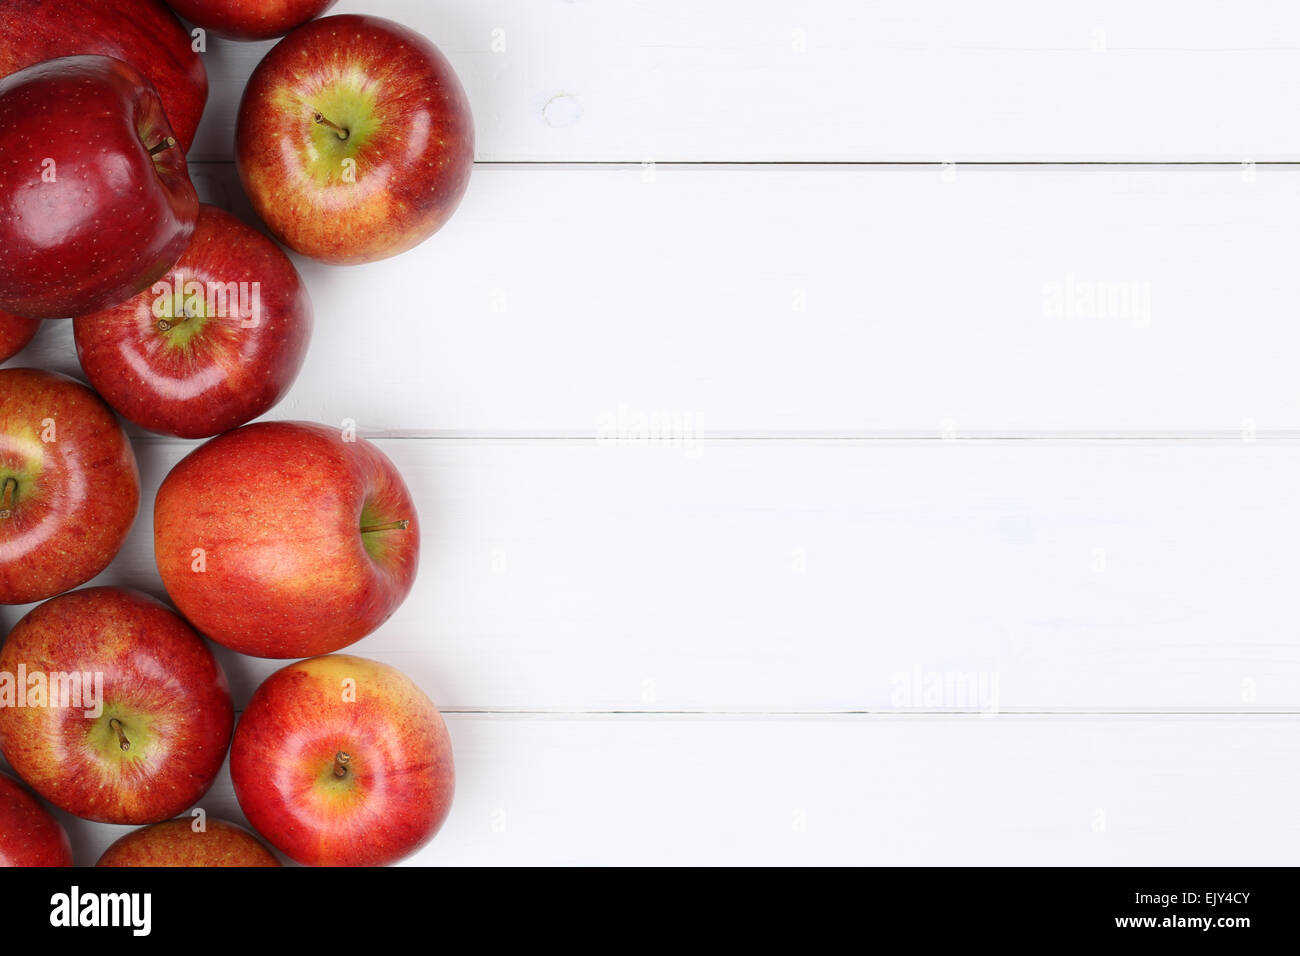 Red apple fruits background on a wooden board with copyspace Stock Photo